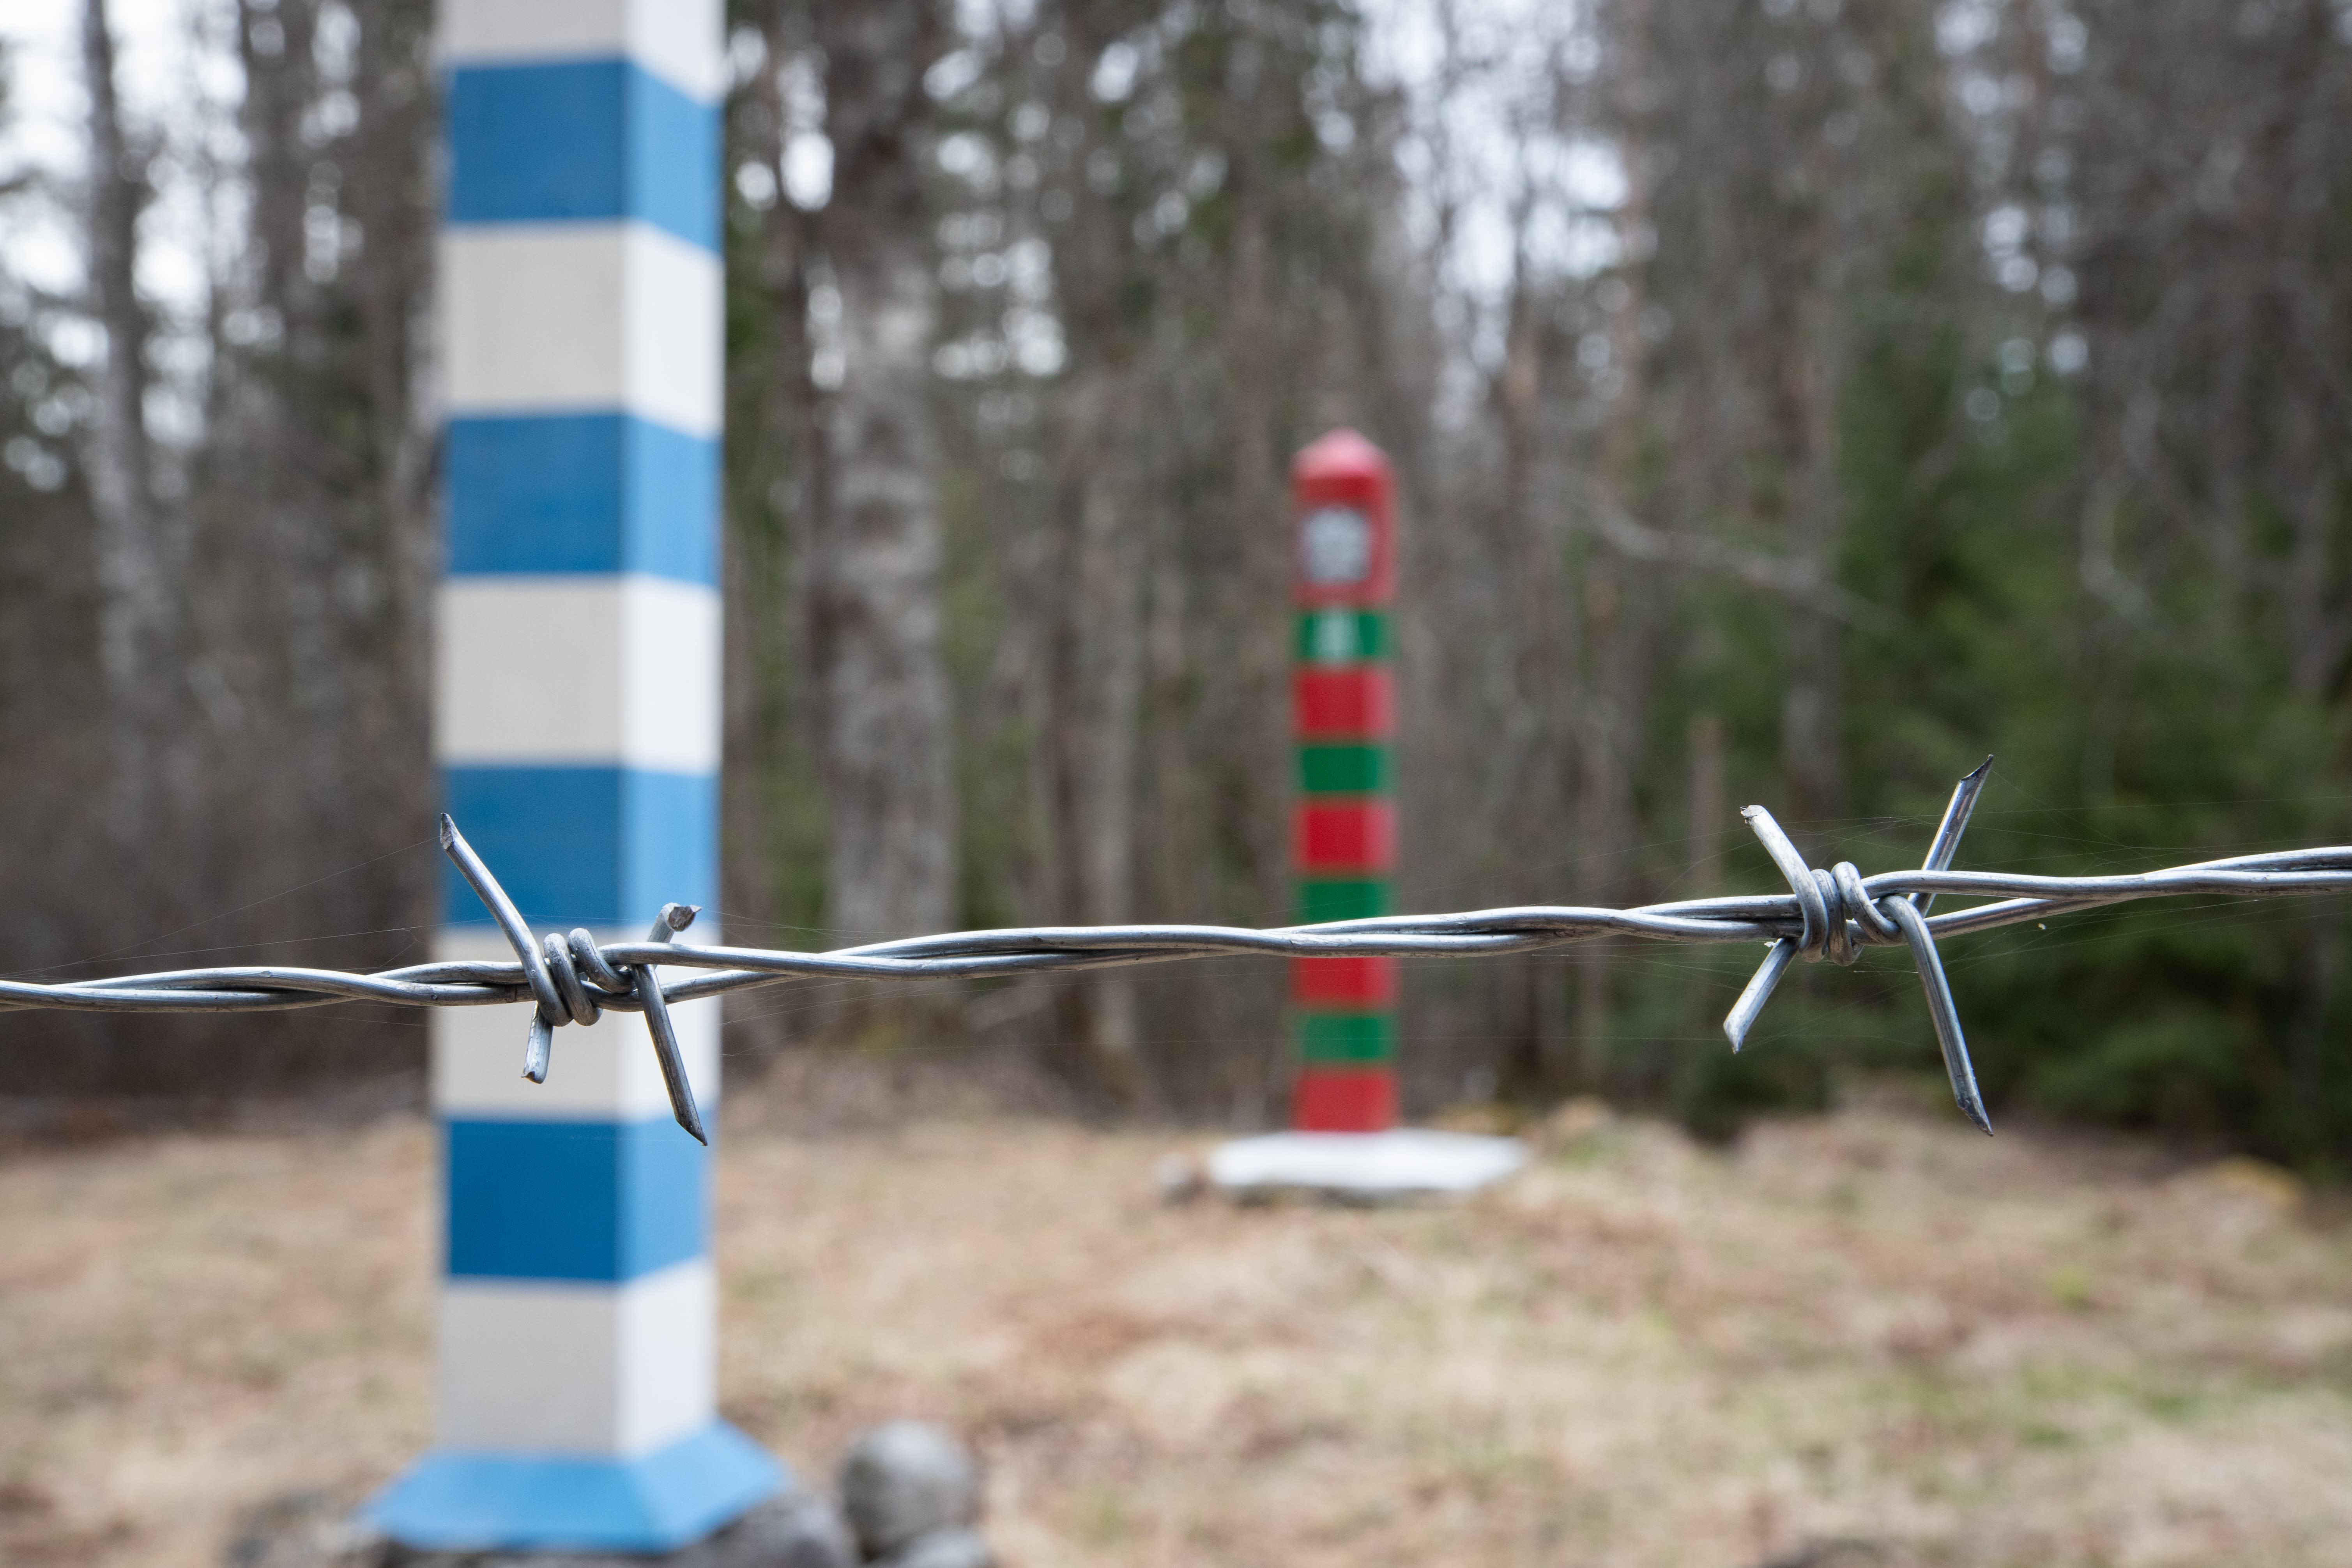 Finland suspects four people of illegally crossing the eastern border